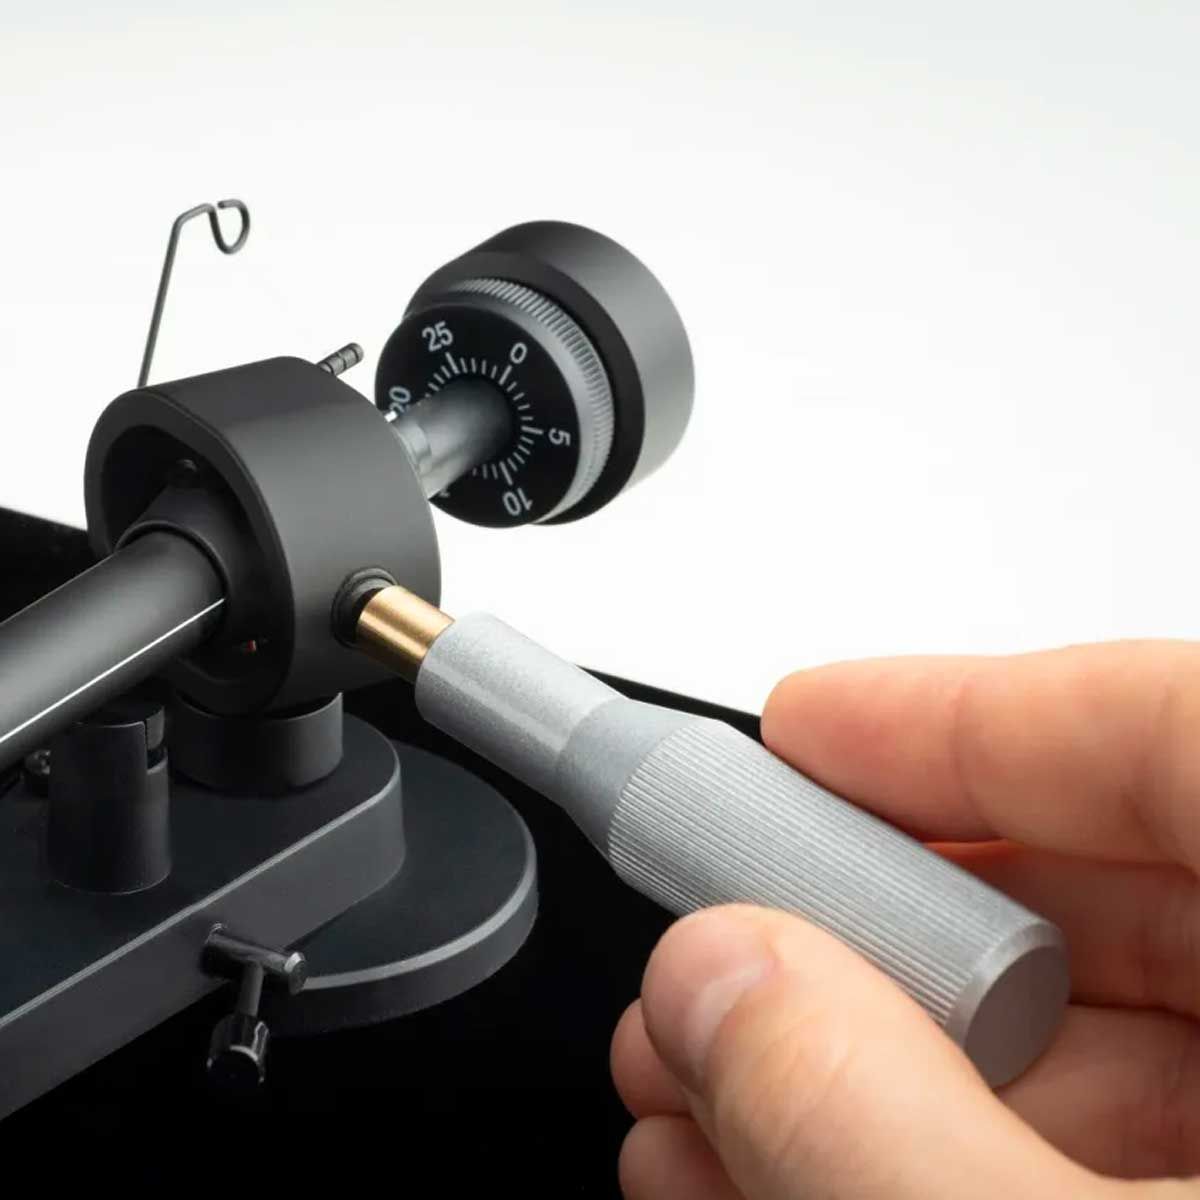 Pro-Ject Adjust It Tonearm bearing adjustment tool being used